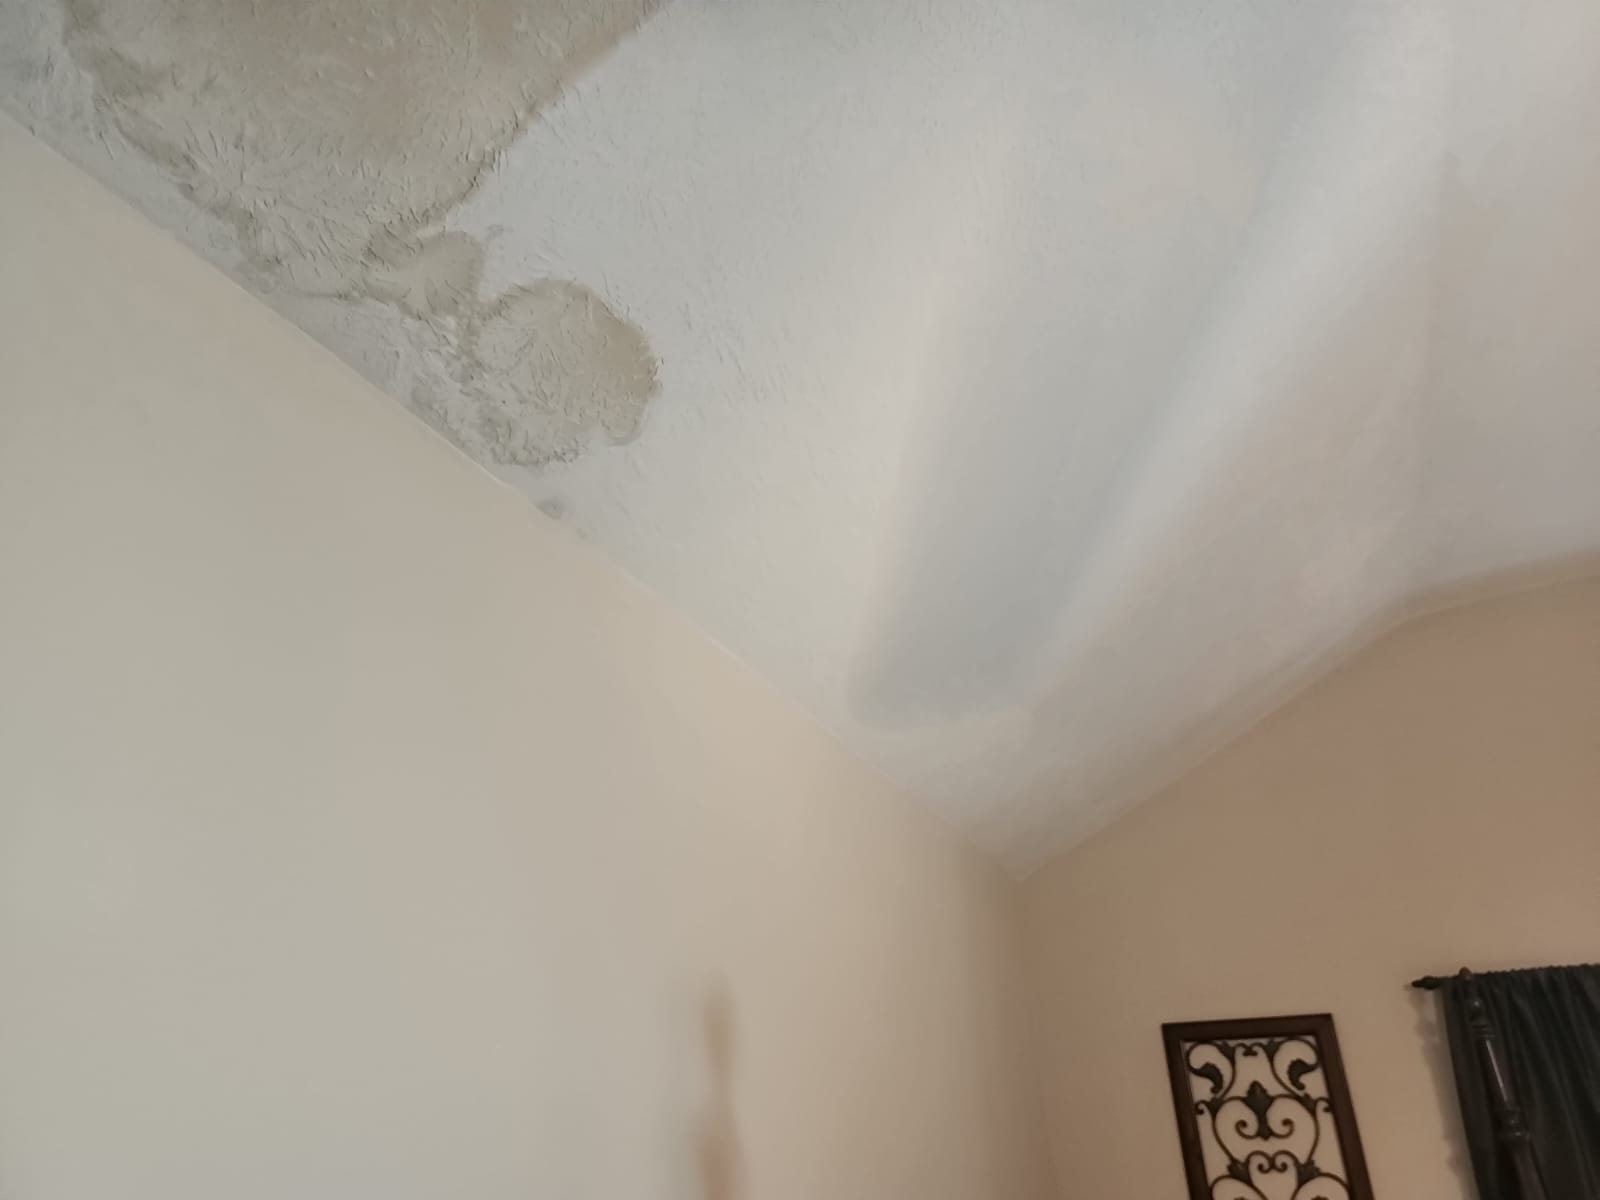 Mitigating water damage after pipe burst in attic.